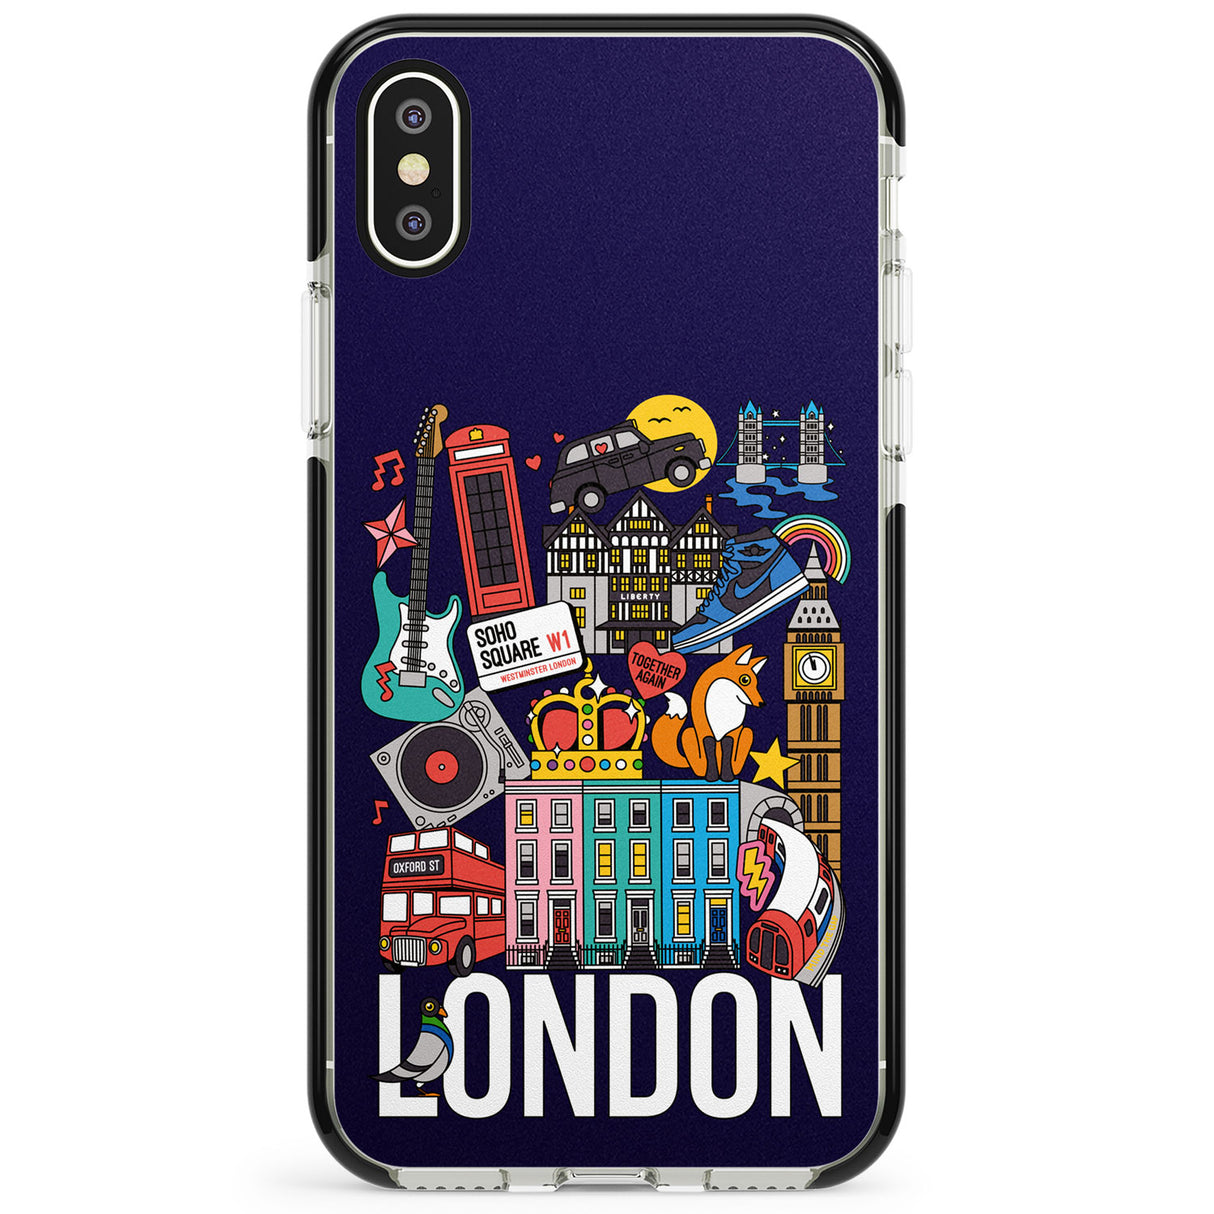 London Calling Phone Case for iPhone X XS Max XR